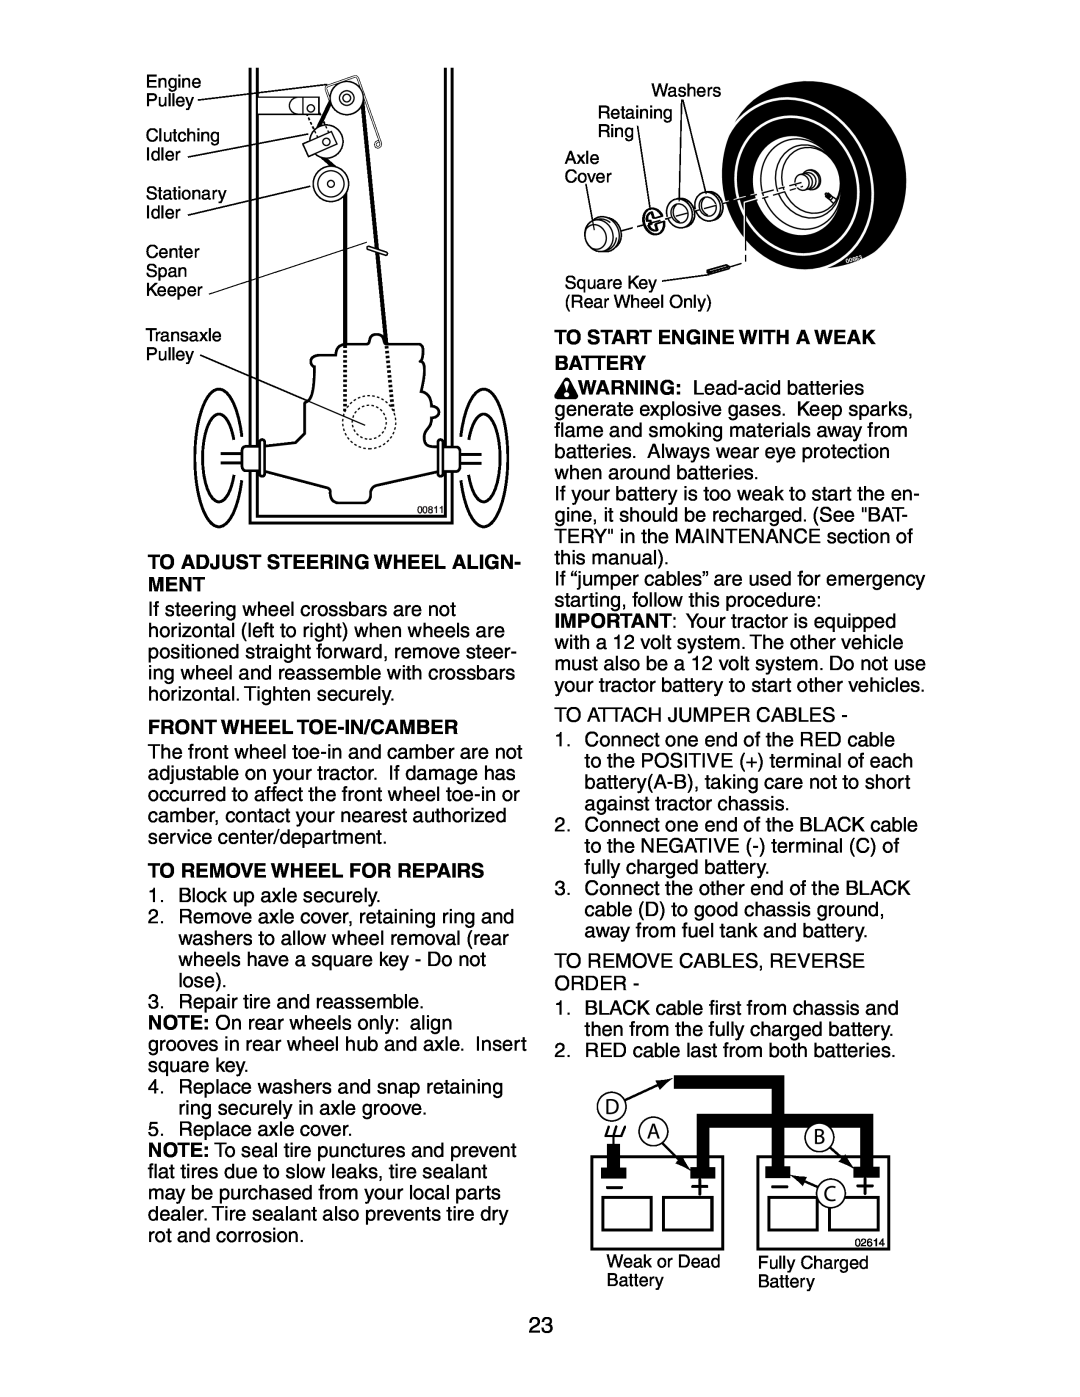 Poulan CN1842STA manual To Adjust Steering Wheel Align- Ment, Front Wheel Toe-In/Camber, To Remove Wheel For Repairs 